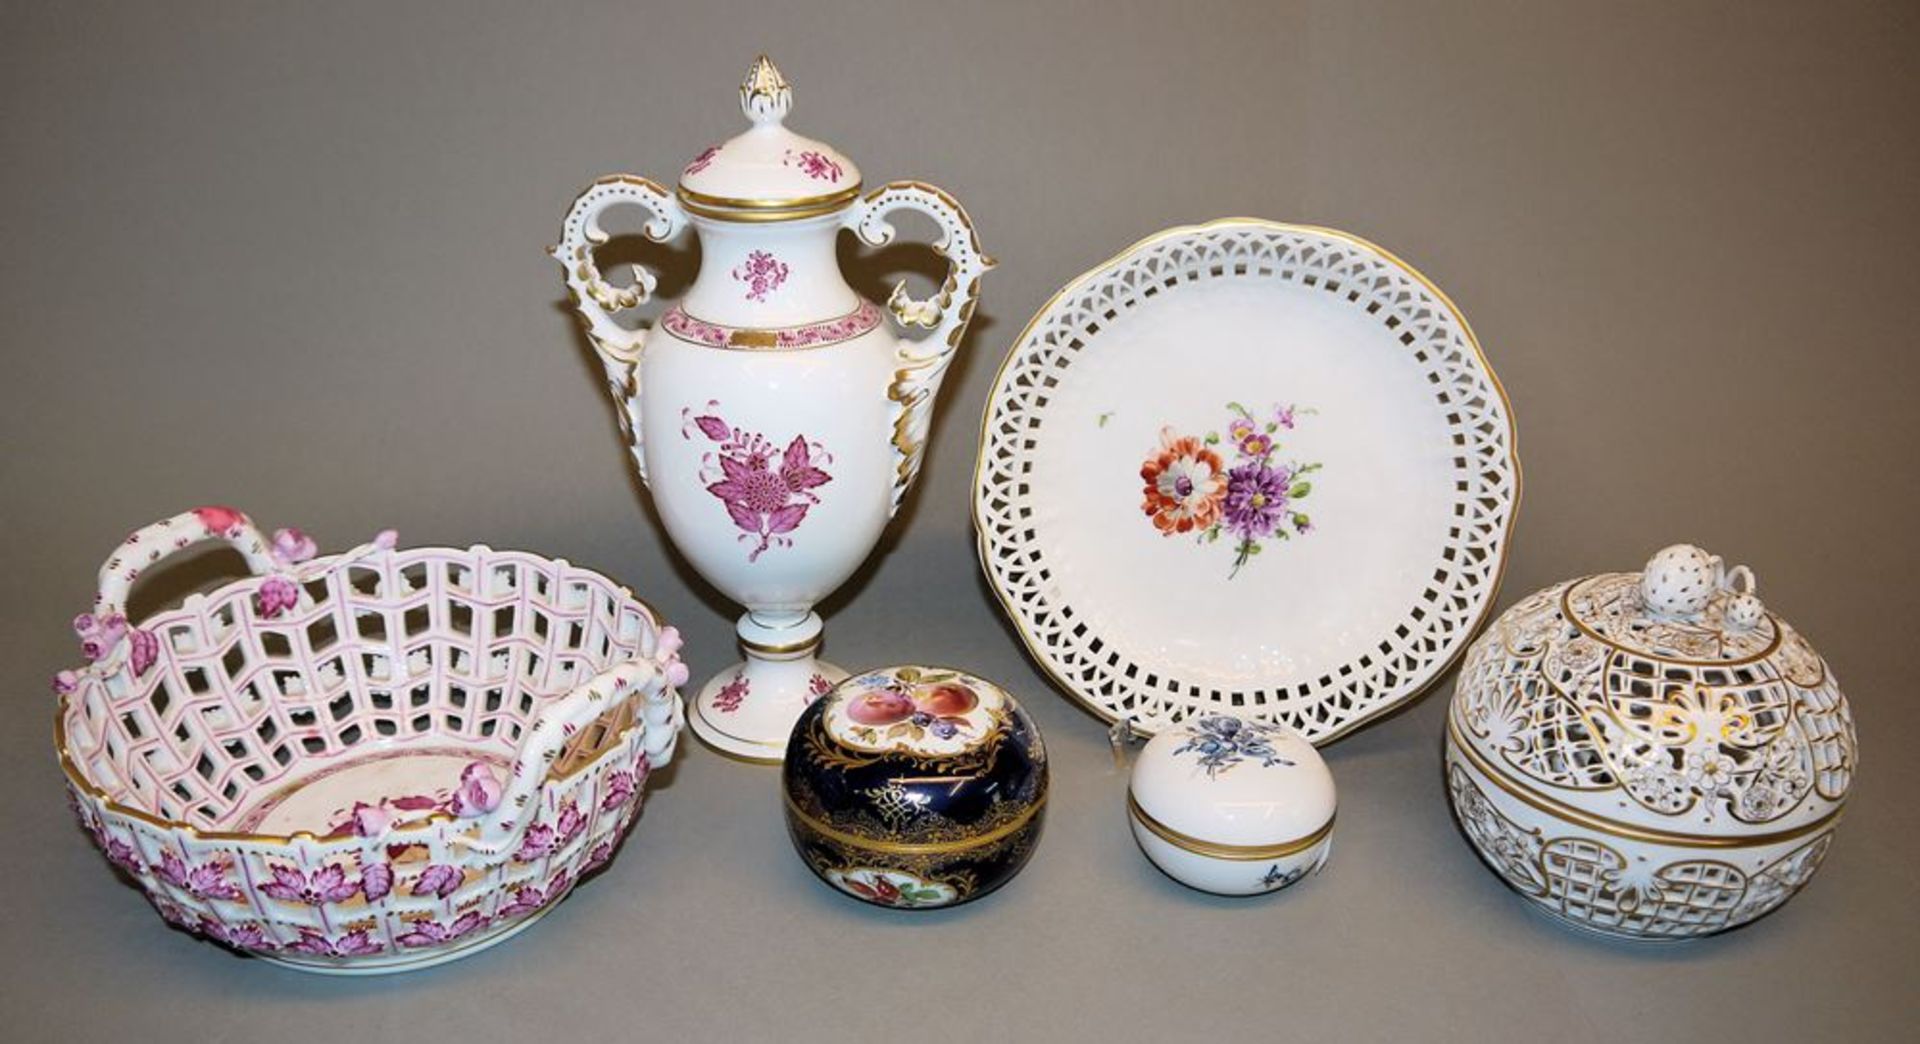 Six pieces of porcelain meißen, KPM and Herend from 1900, 1. Choice